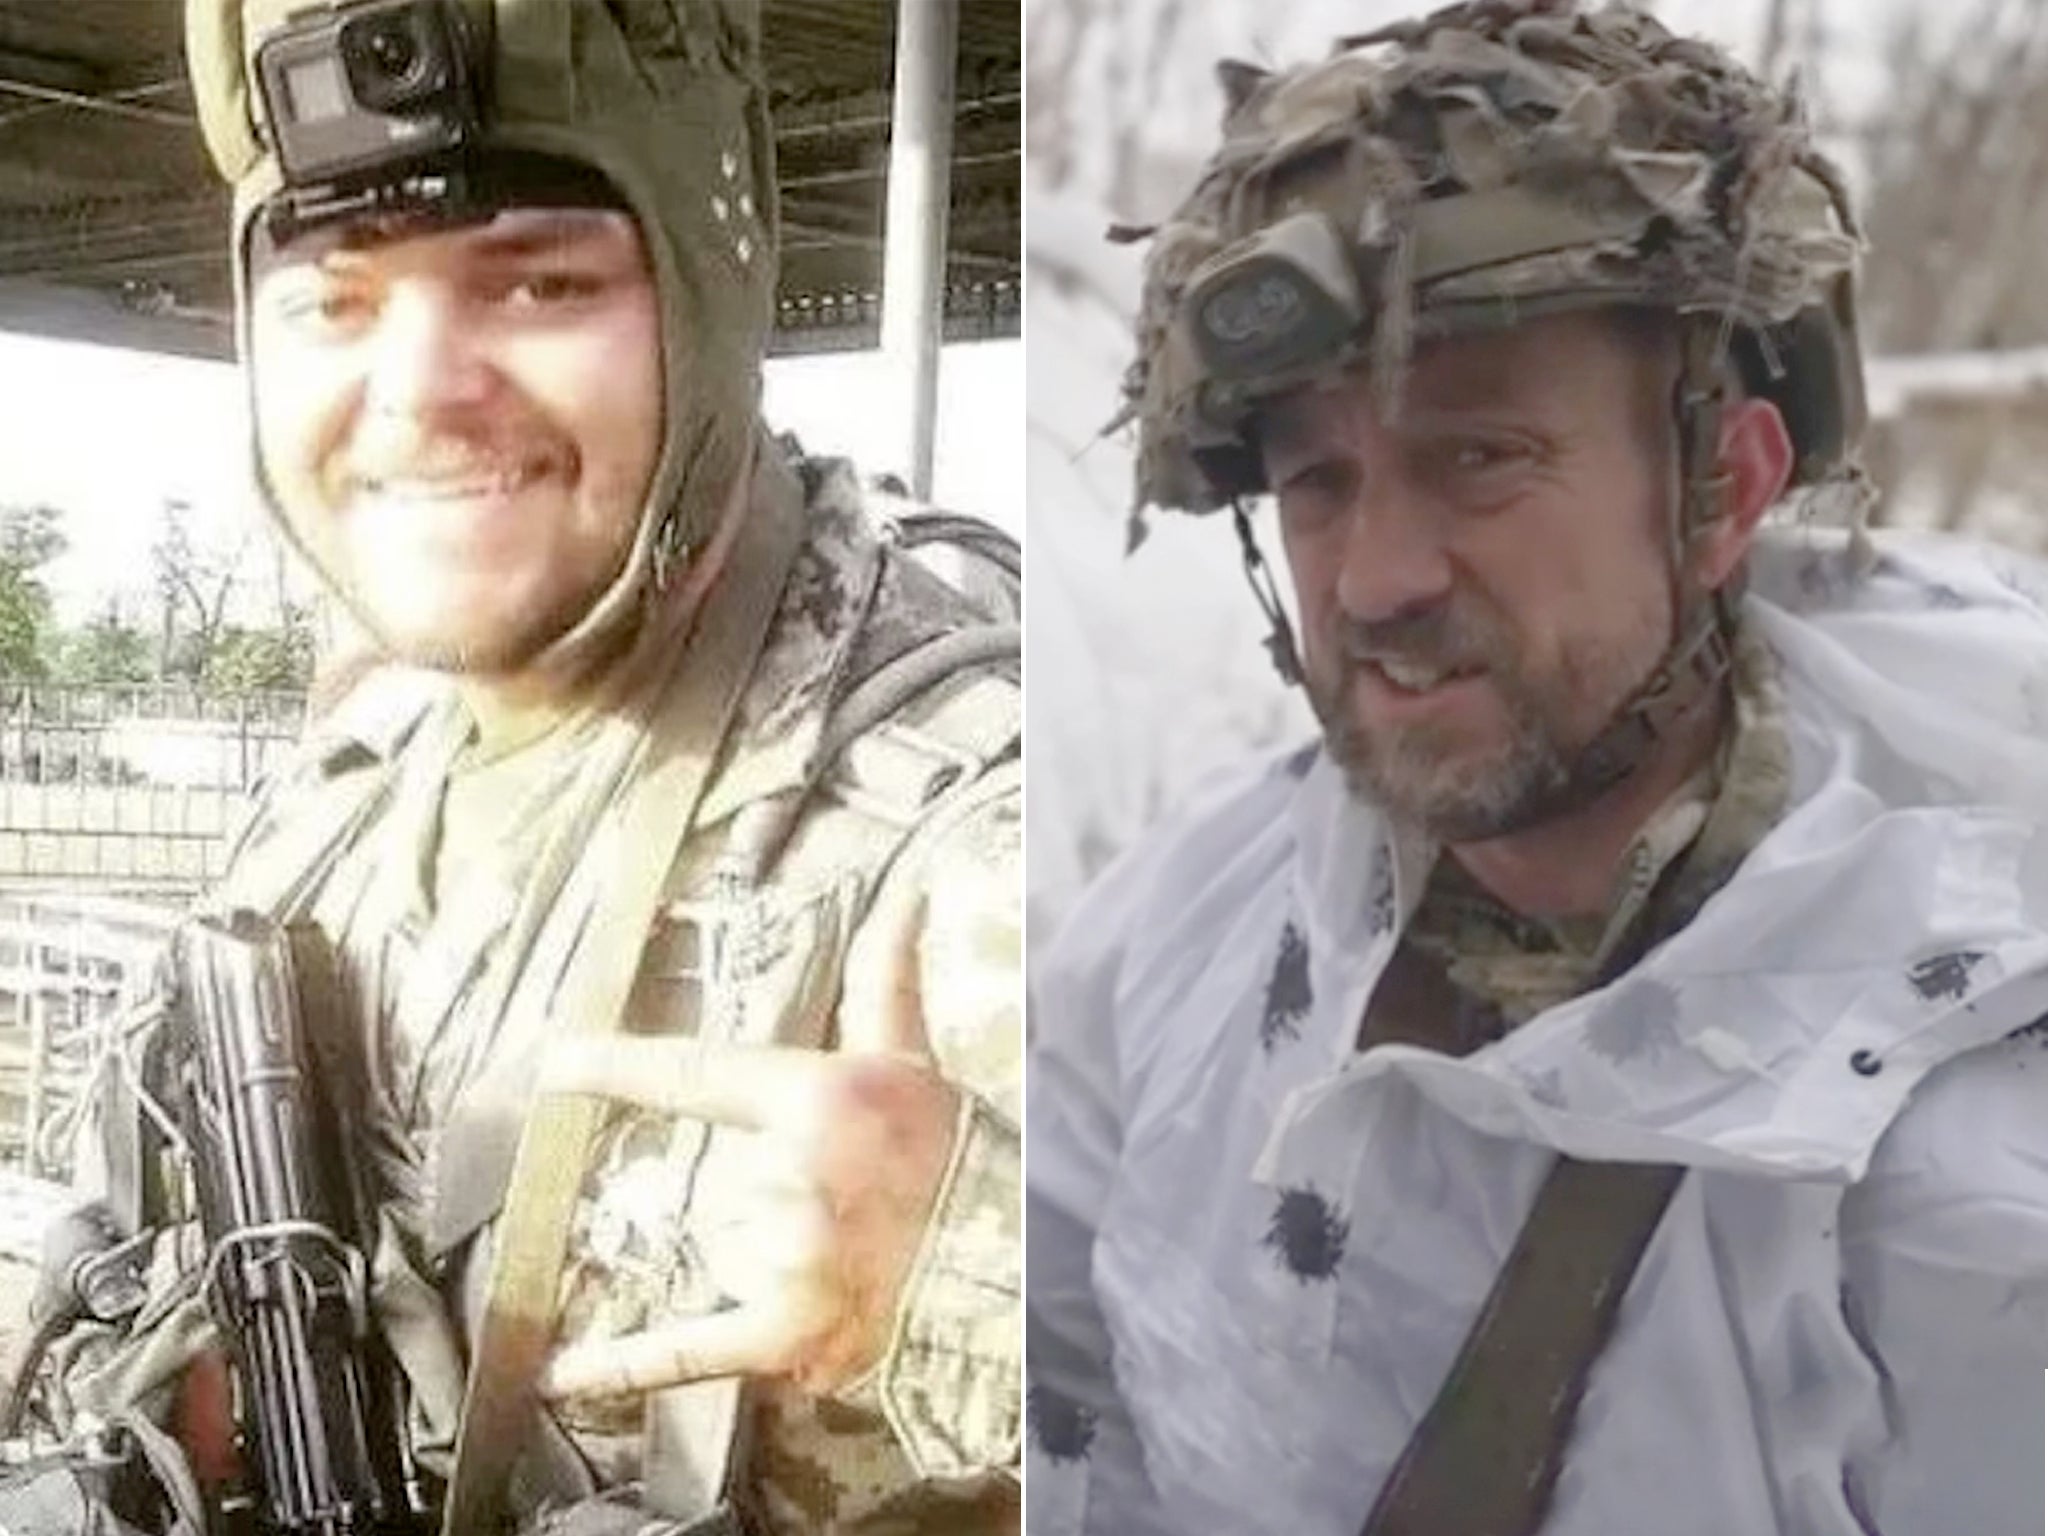 The DNR wants to use the cases of Aiden Aslin and Shaun Pinner to pressure the UK government for supporting Ukraine’s war effort